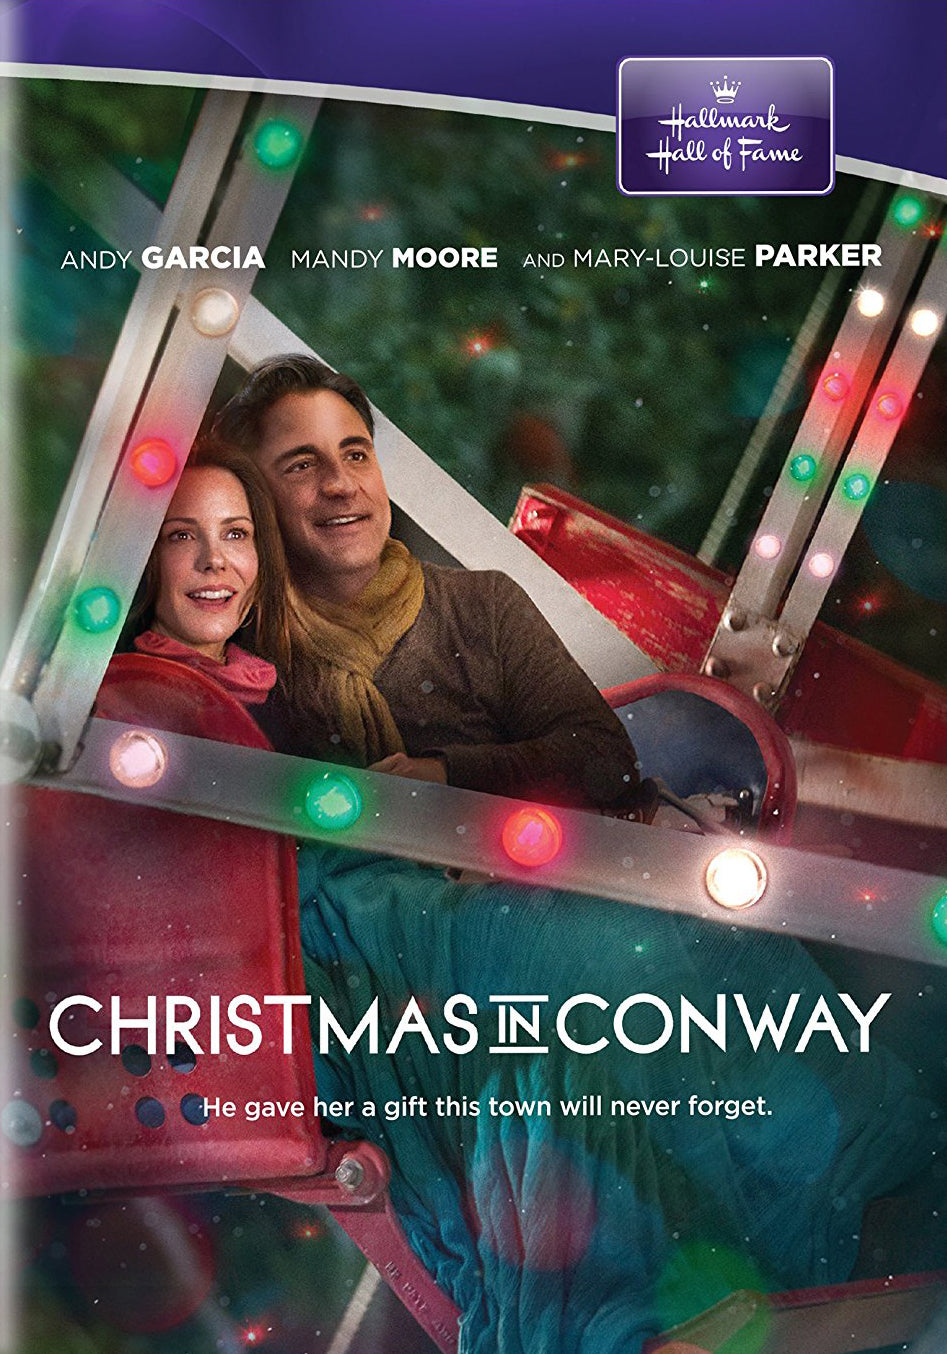 Christmas in Conway cover art